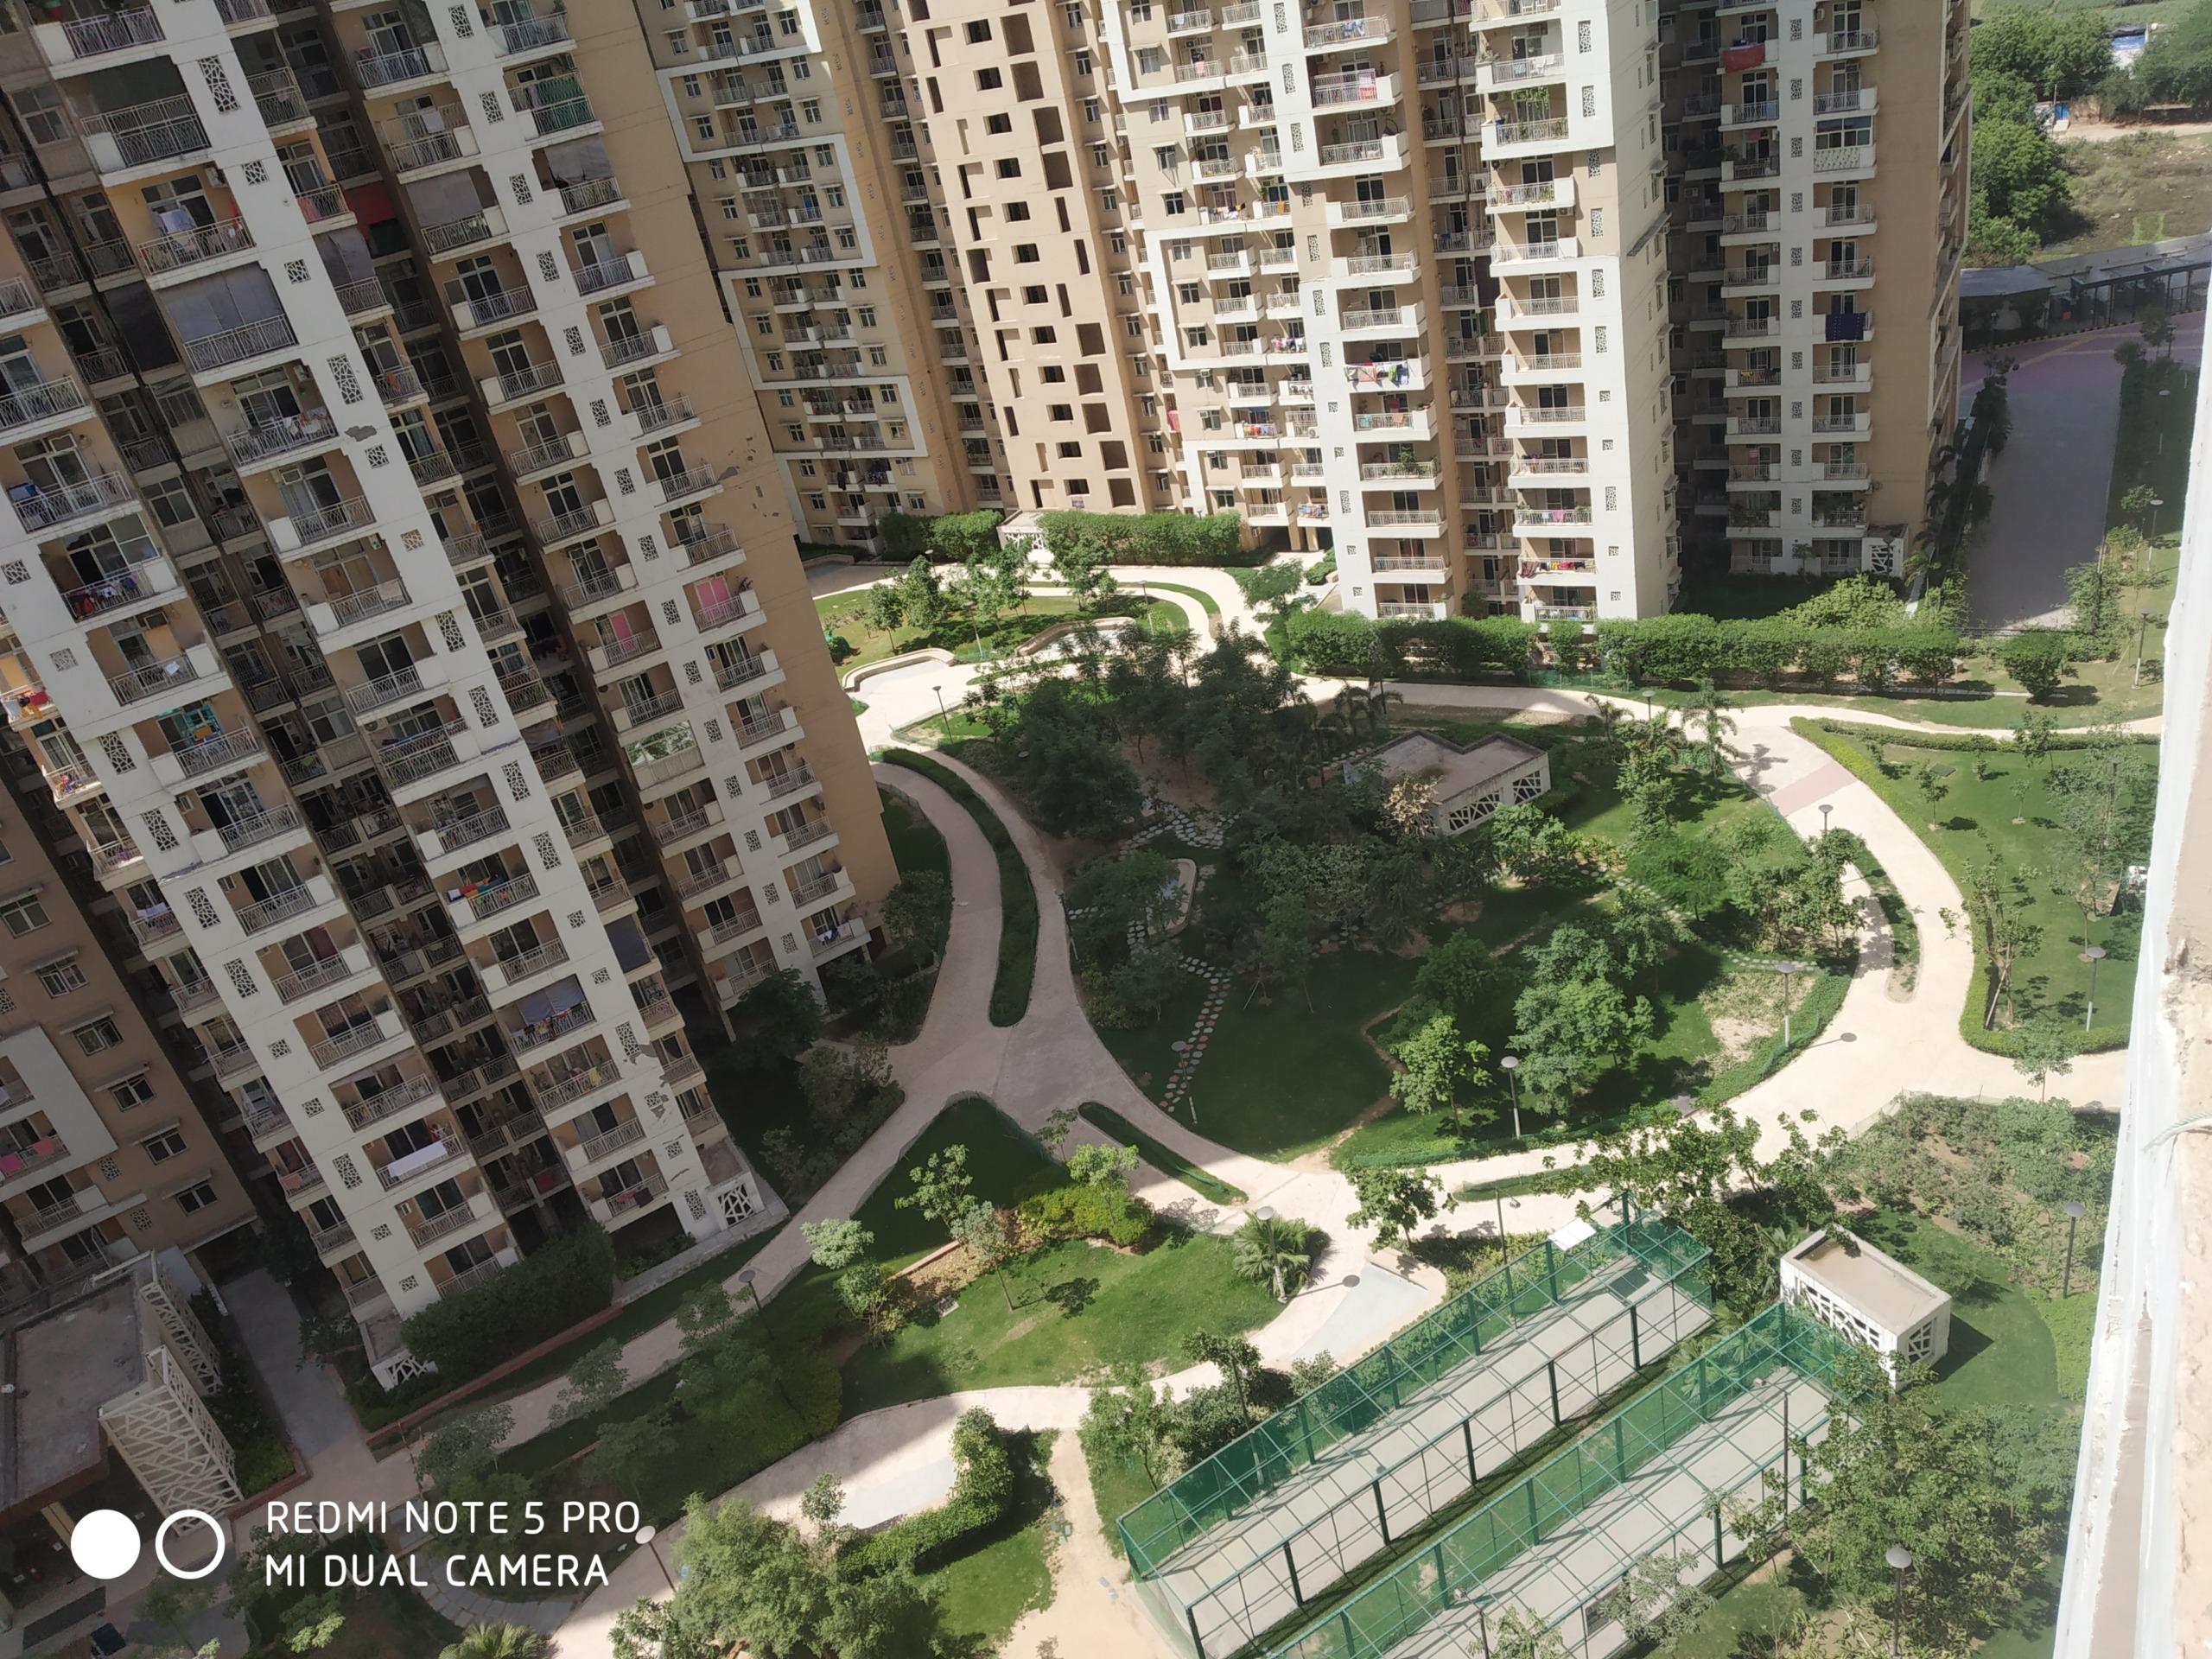 Mahagun Mywoods Noida Extension Gaur city 2 flat for sale and rent in greater noida west